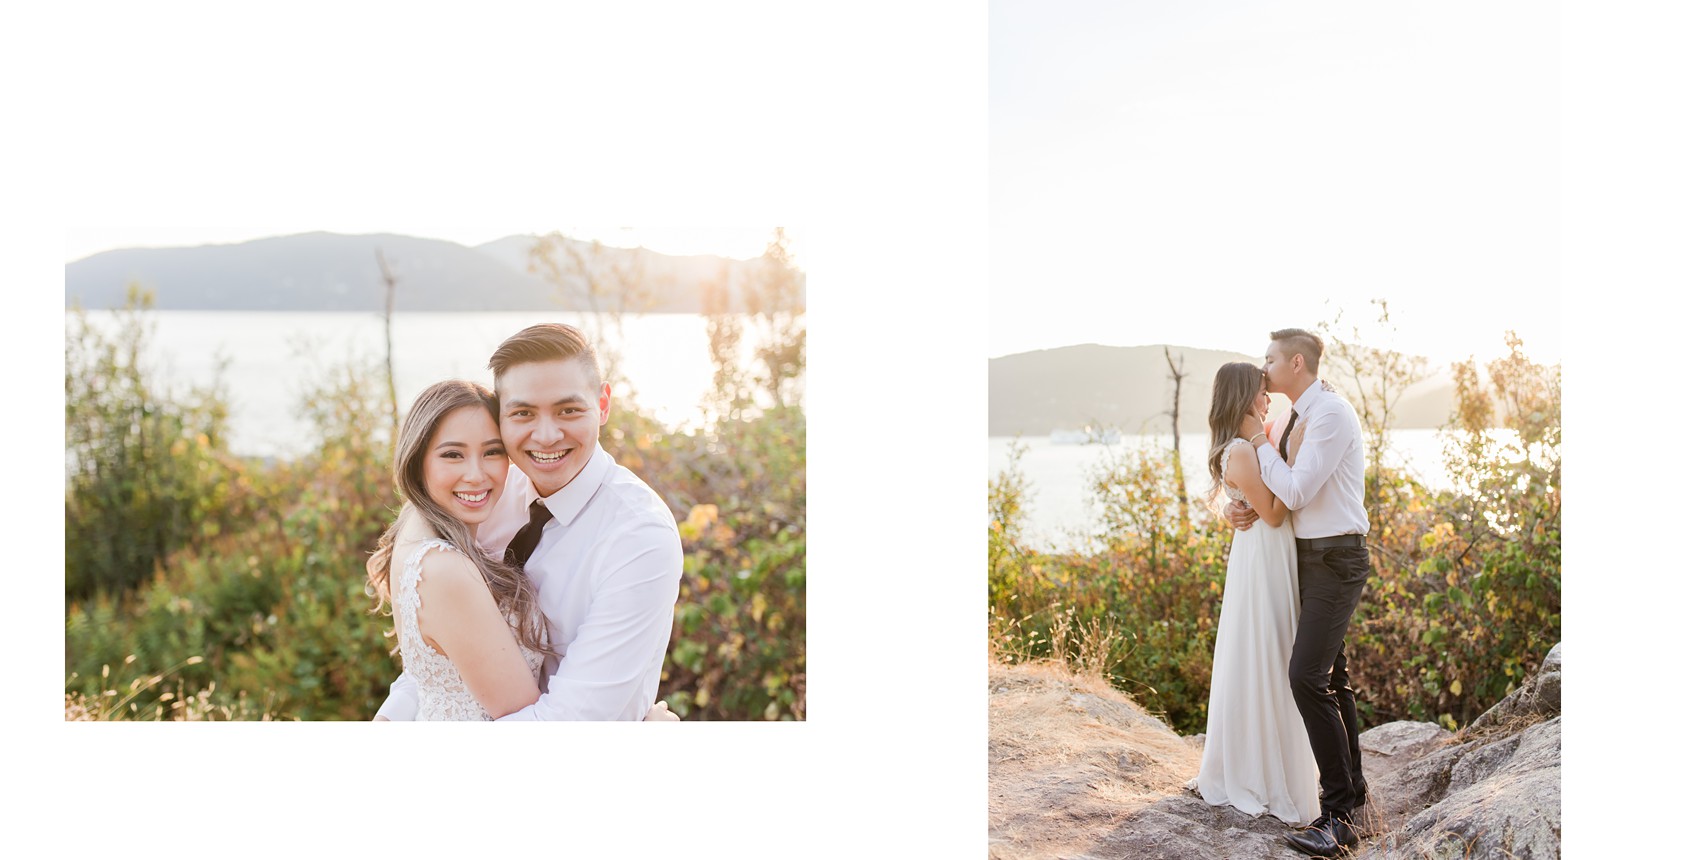 West Vancouver Whytecliff Engagement photos - couple smiling at the camera together then going in for a forehead kiss